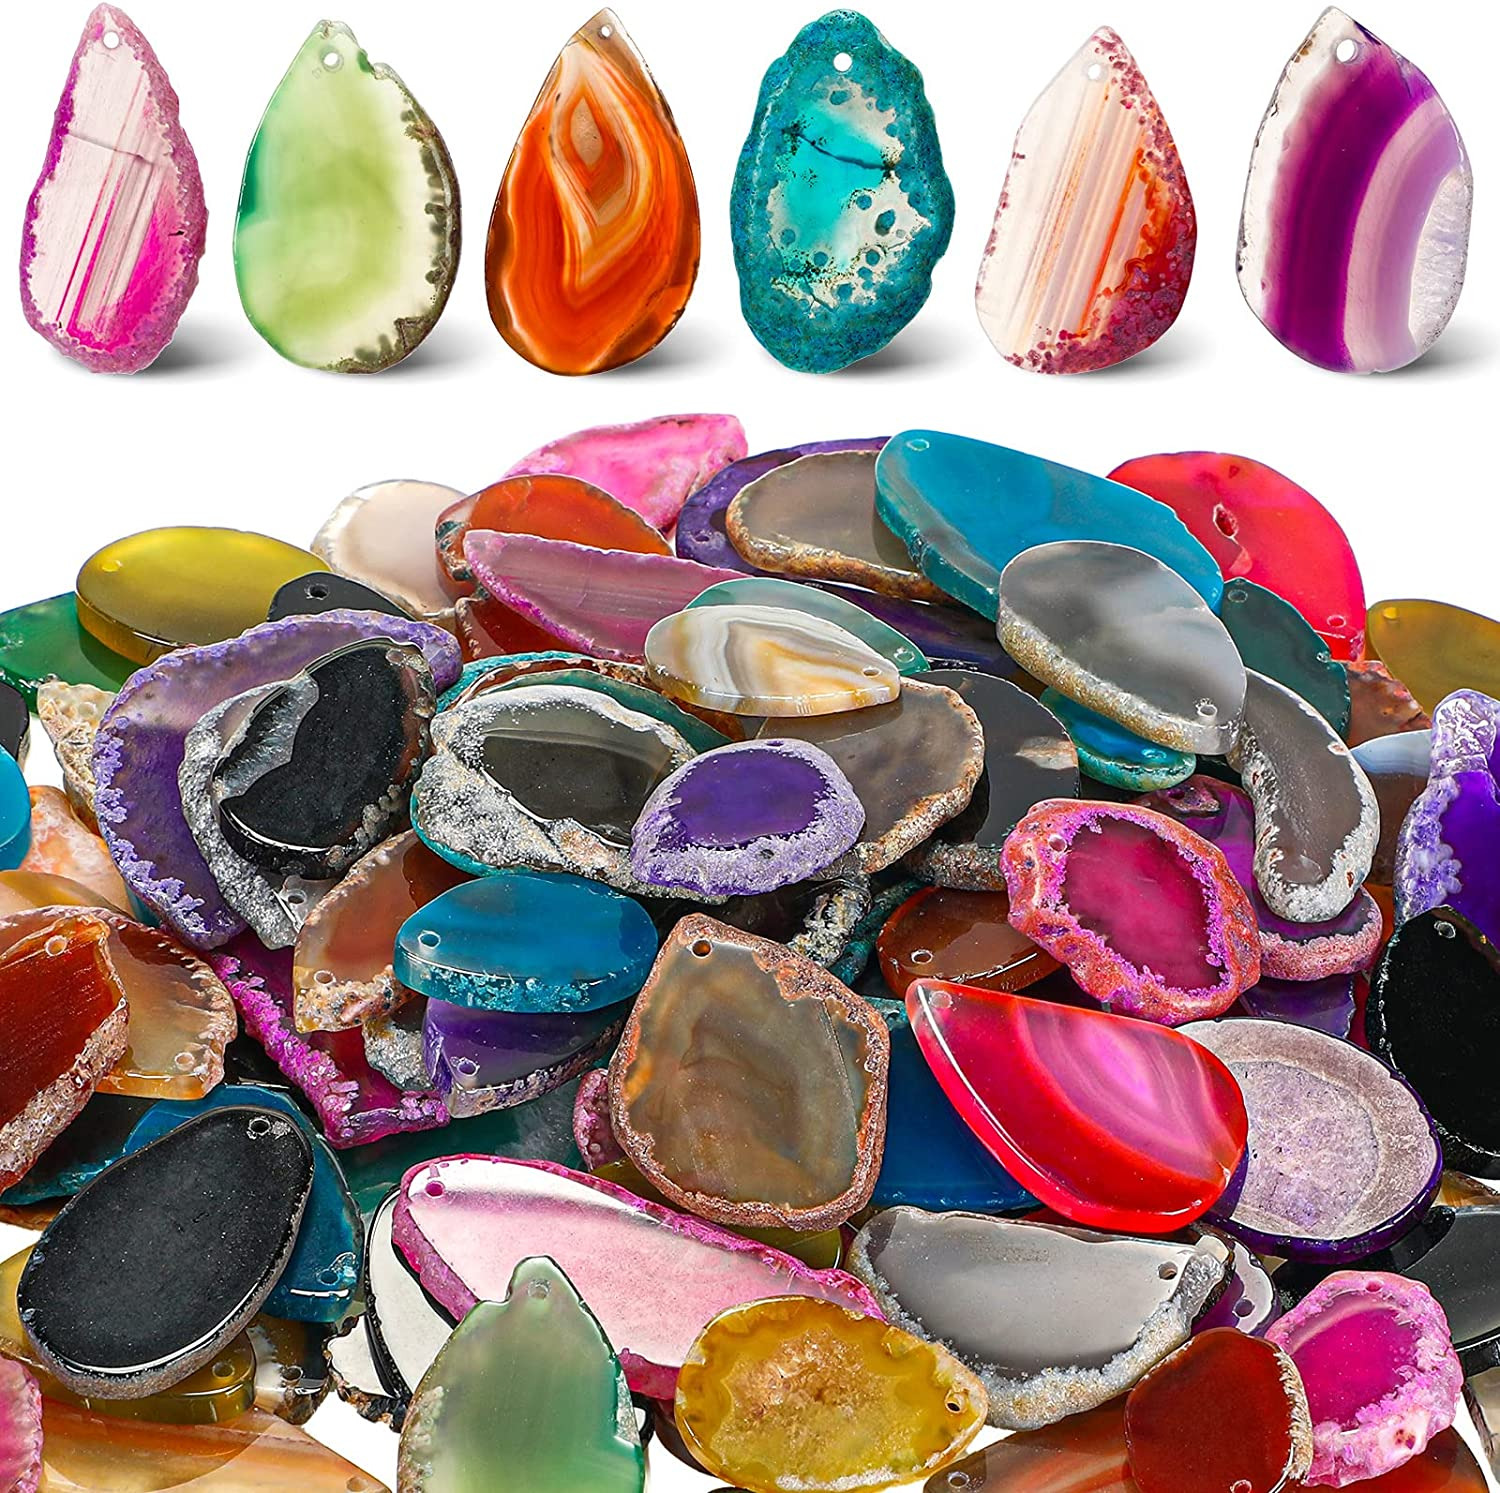 100 Pieces Geode Agate Slice Crystals Bulk Polished Geodes Stones Agate Light 